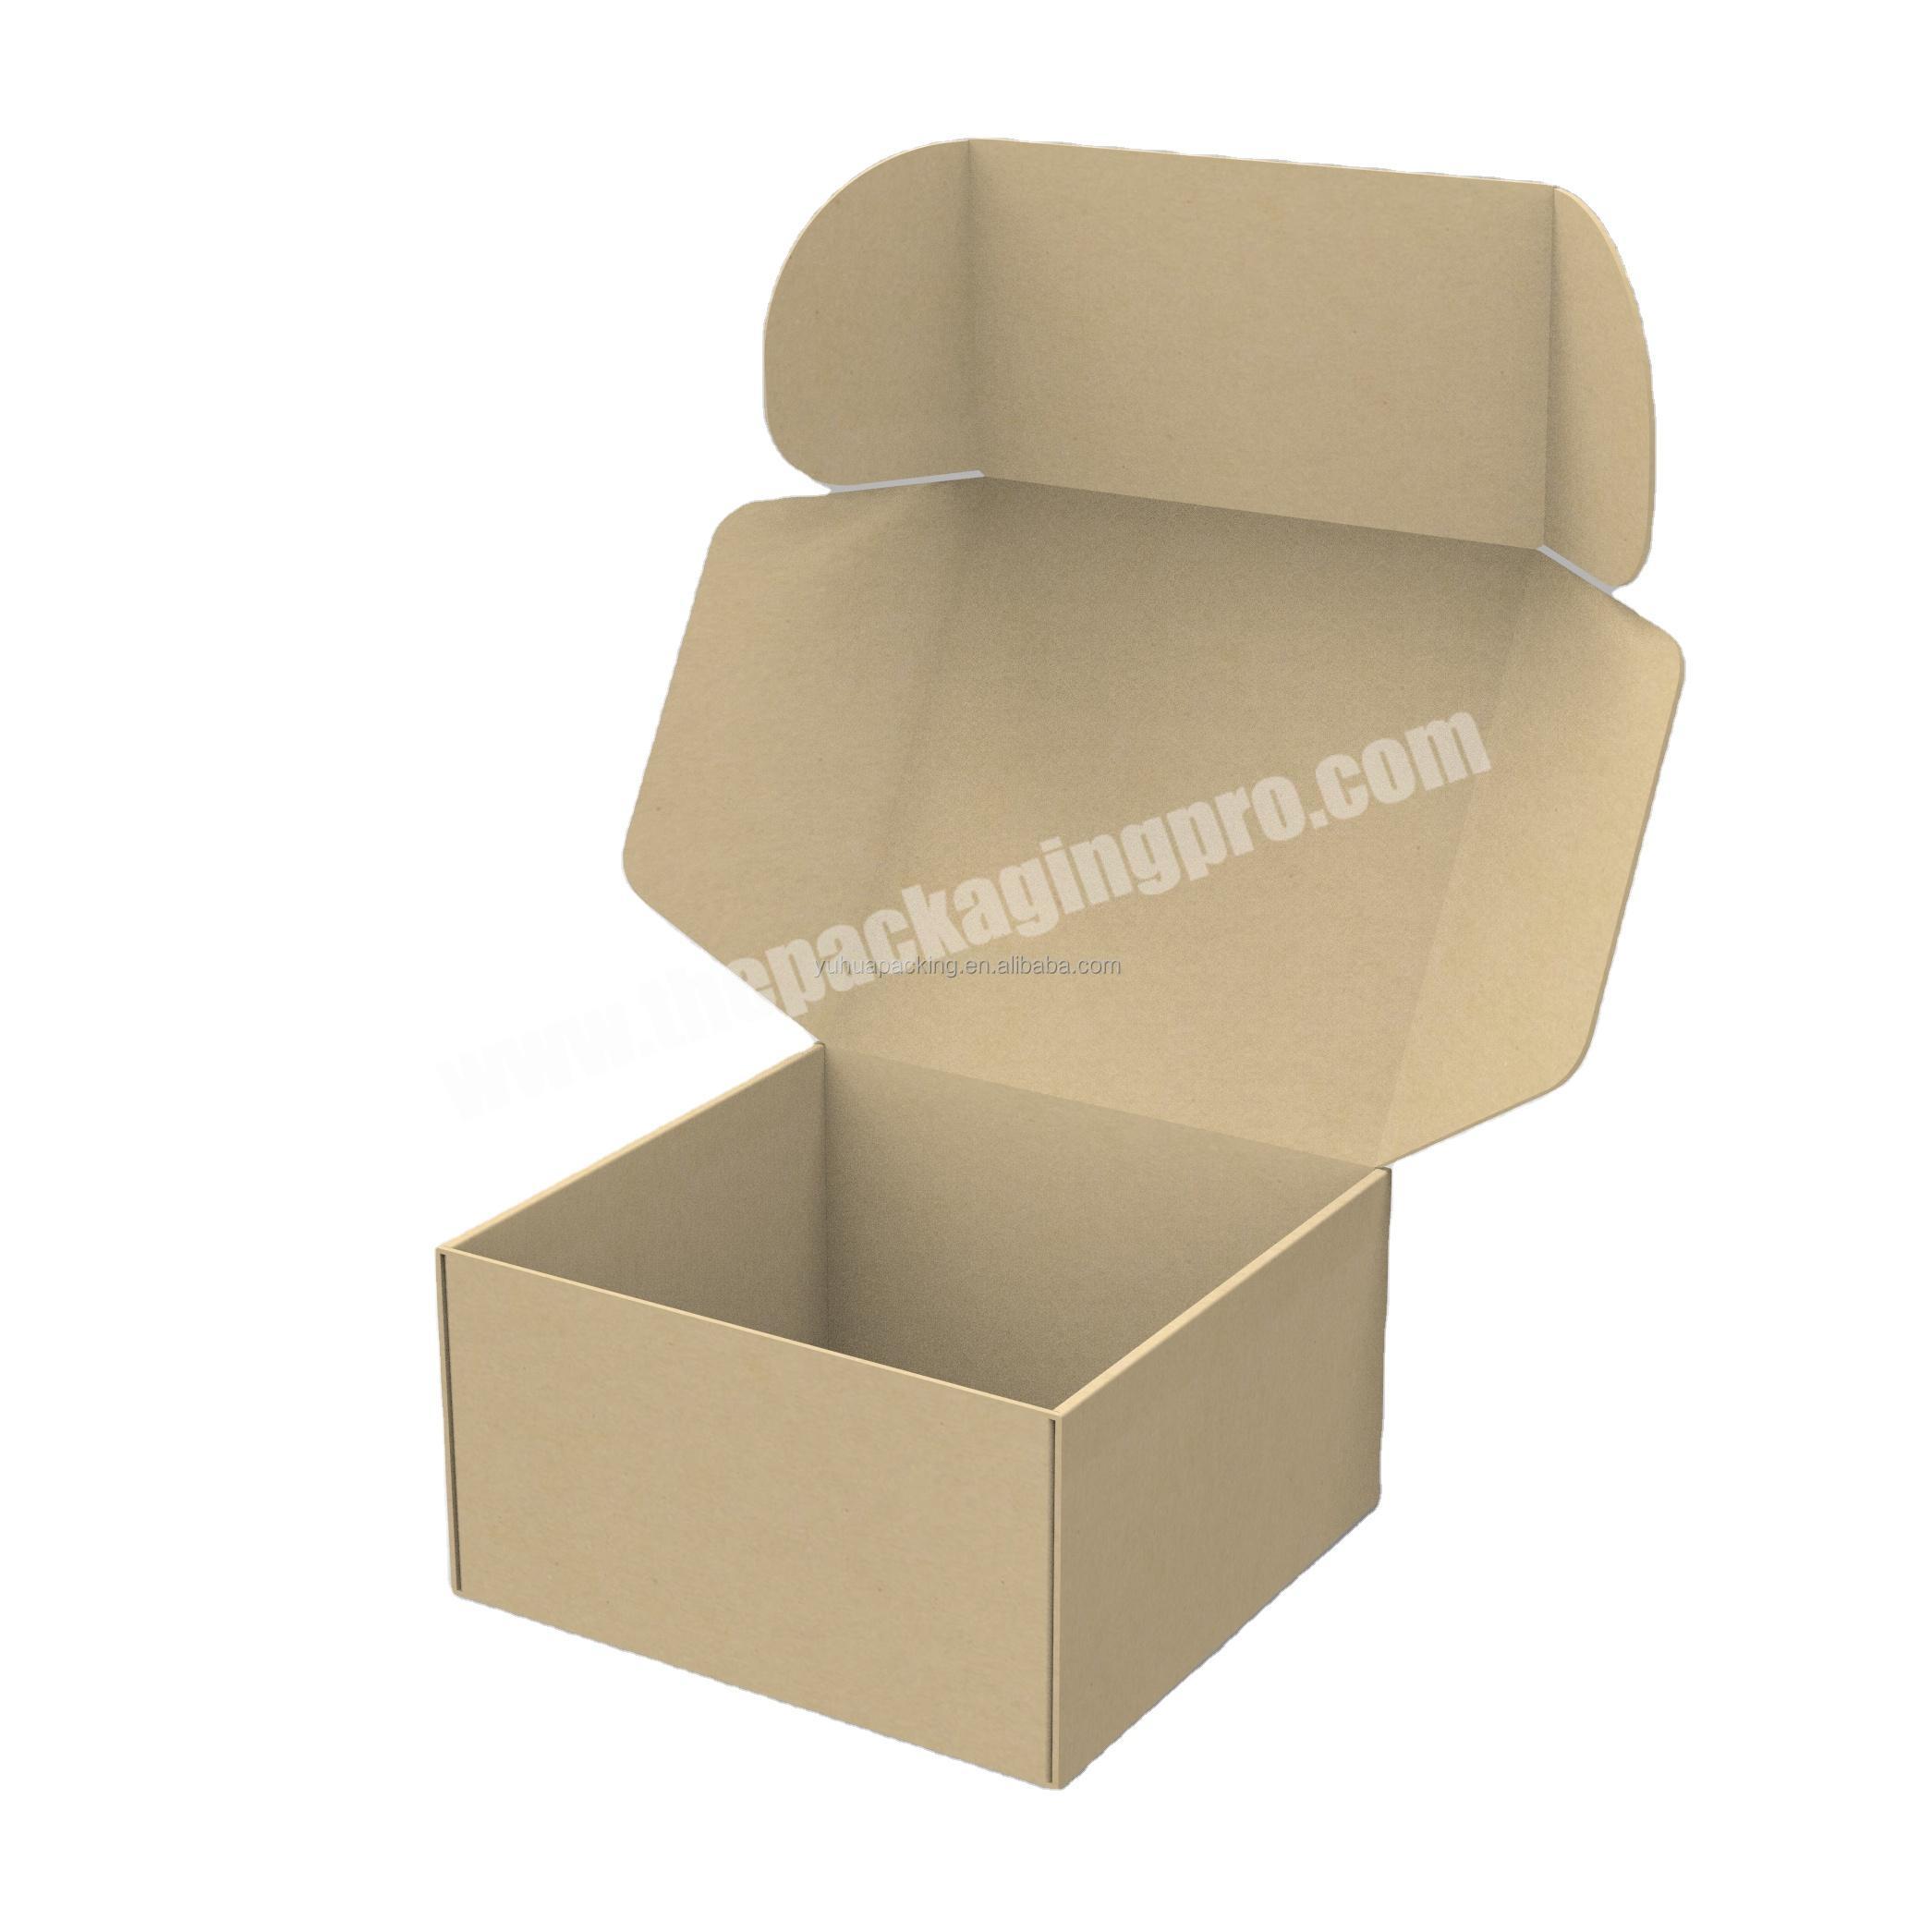 Corrugated paper craft box mailing box for shoes socks clothes shipping logo customized